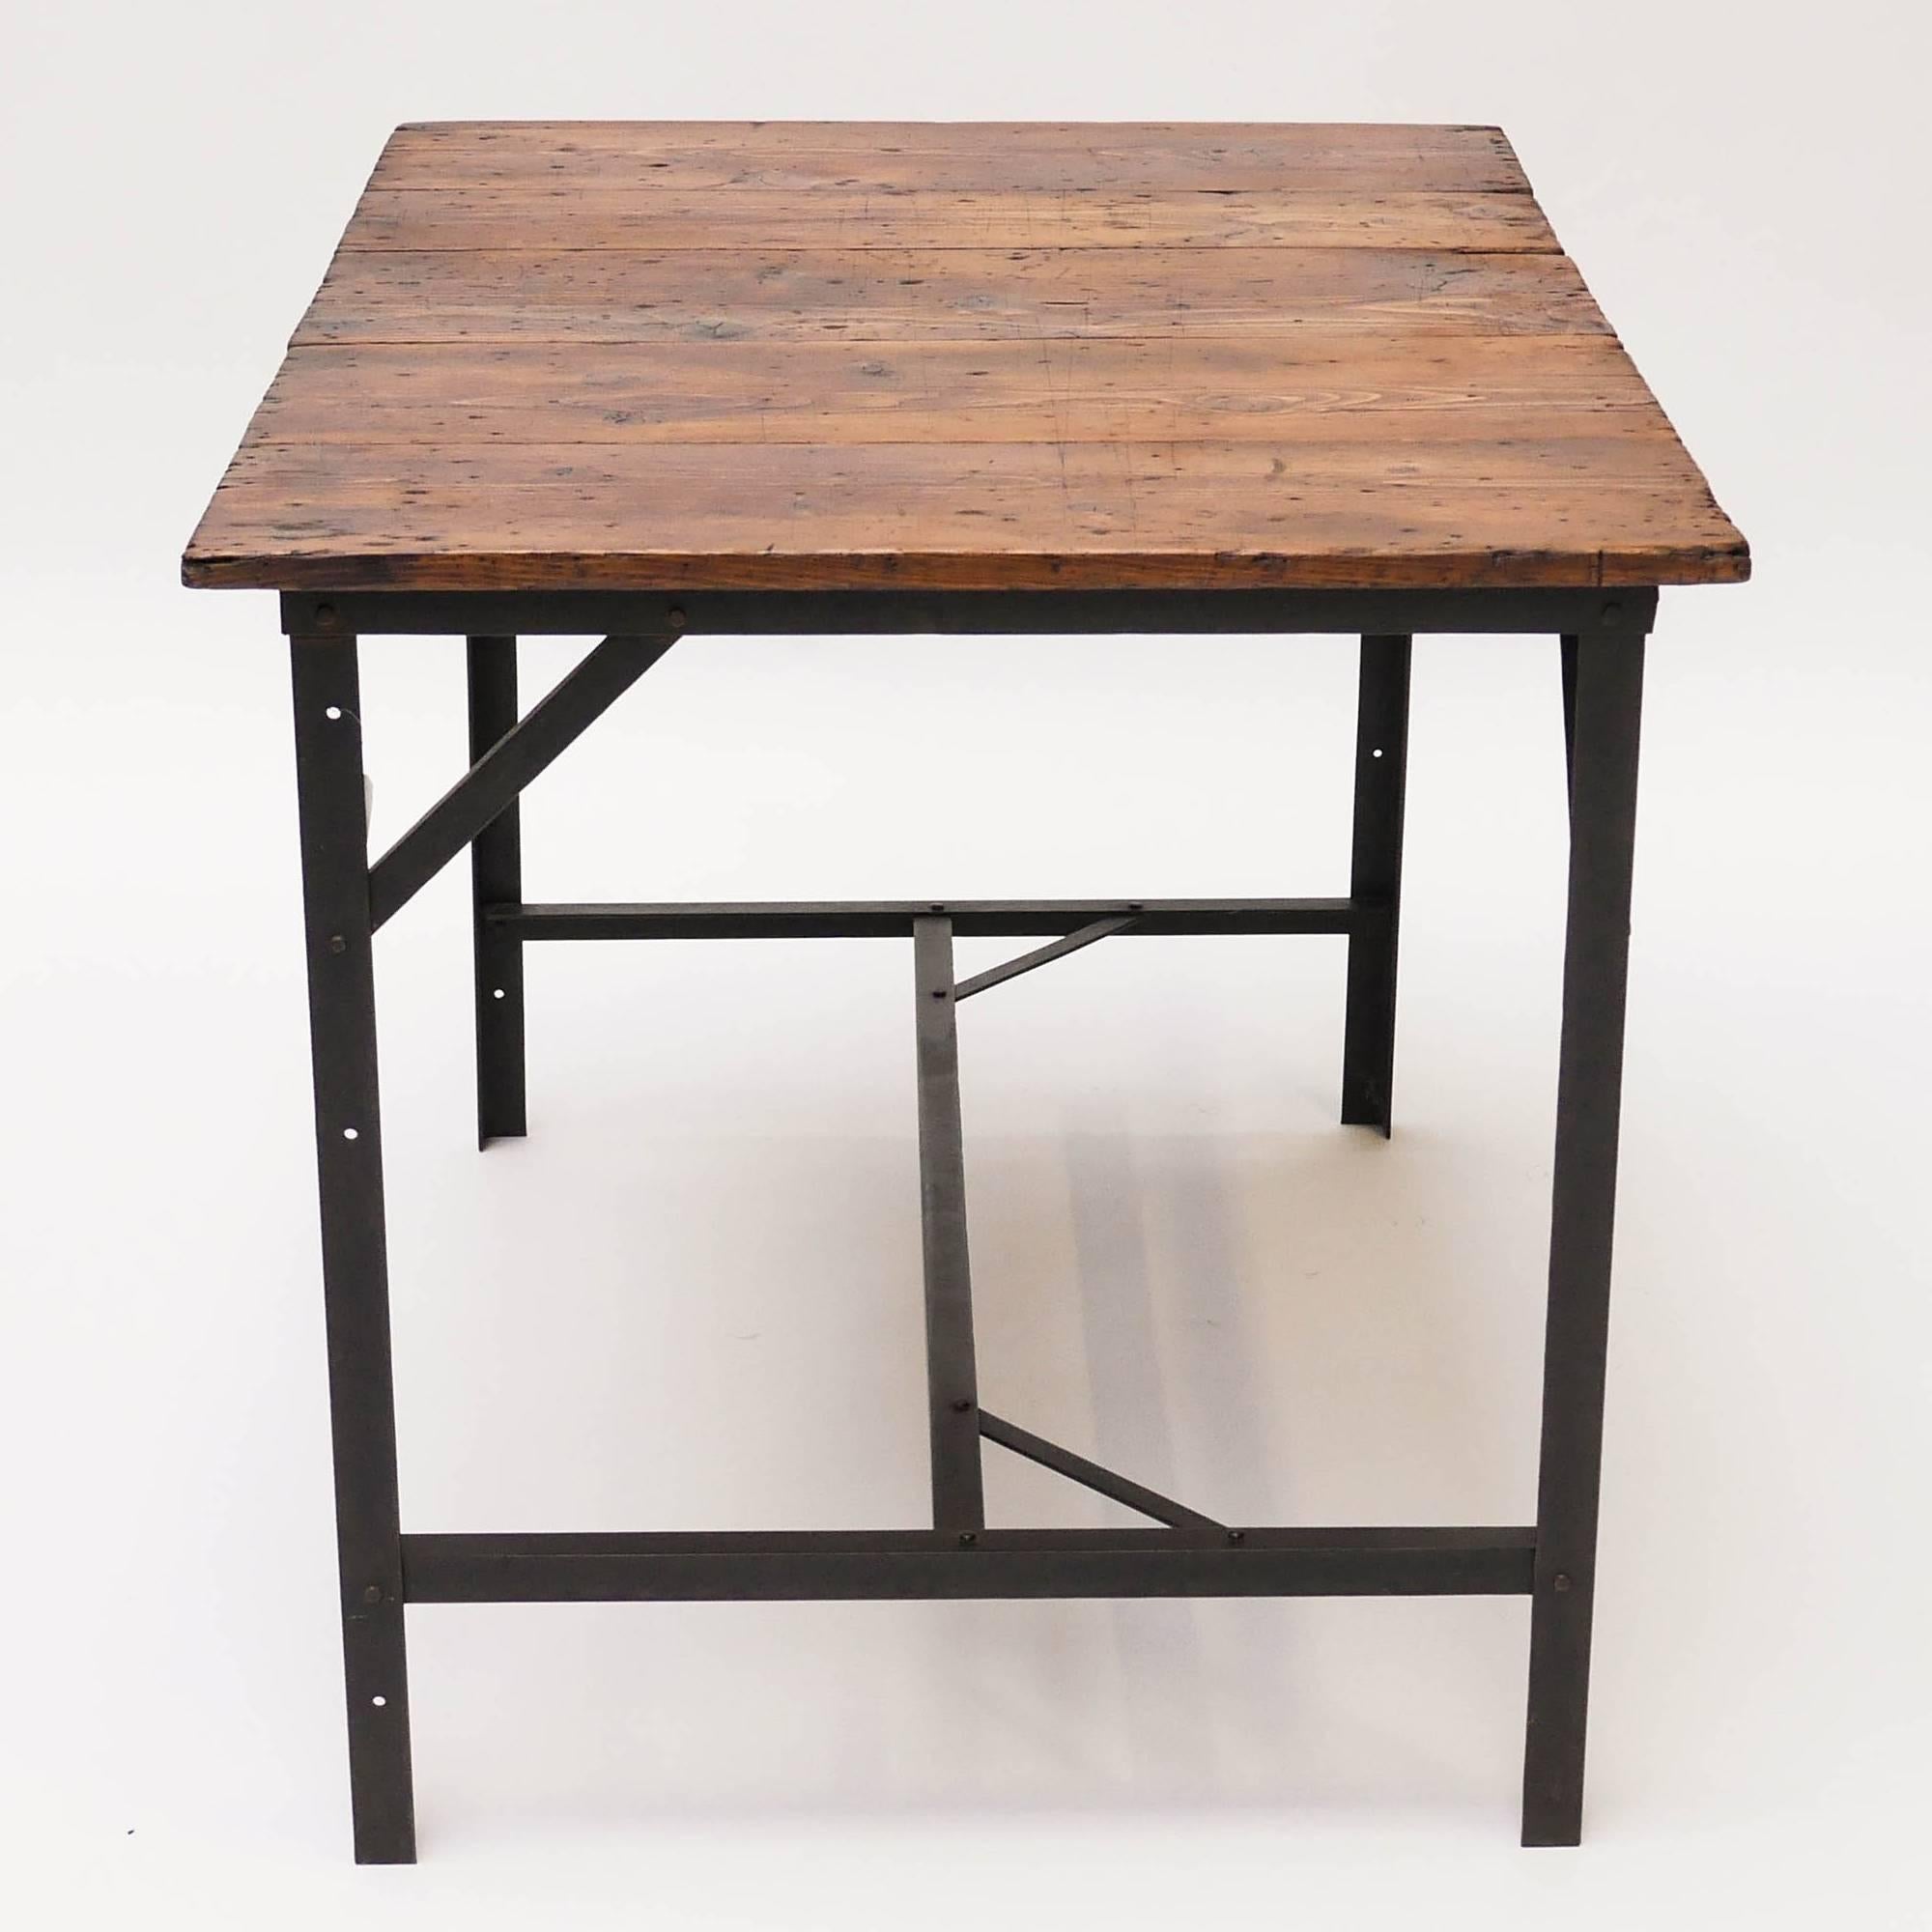 French Wooden Workbench, Origin France, Early 20th Century